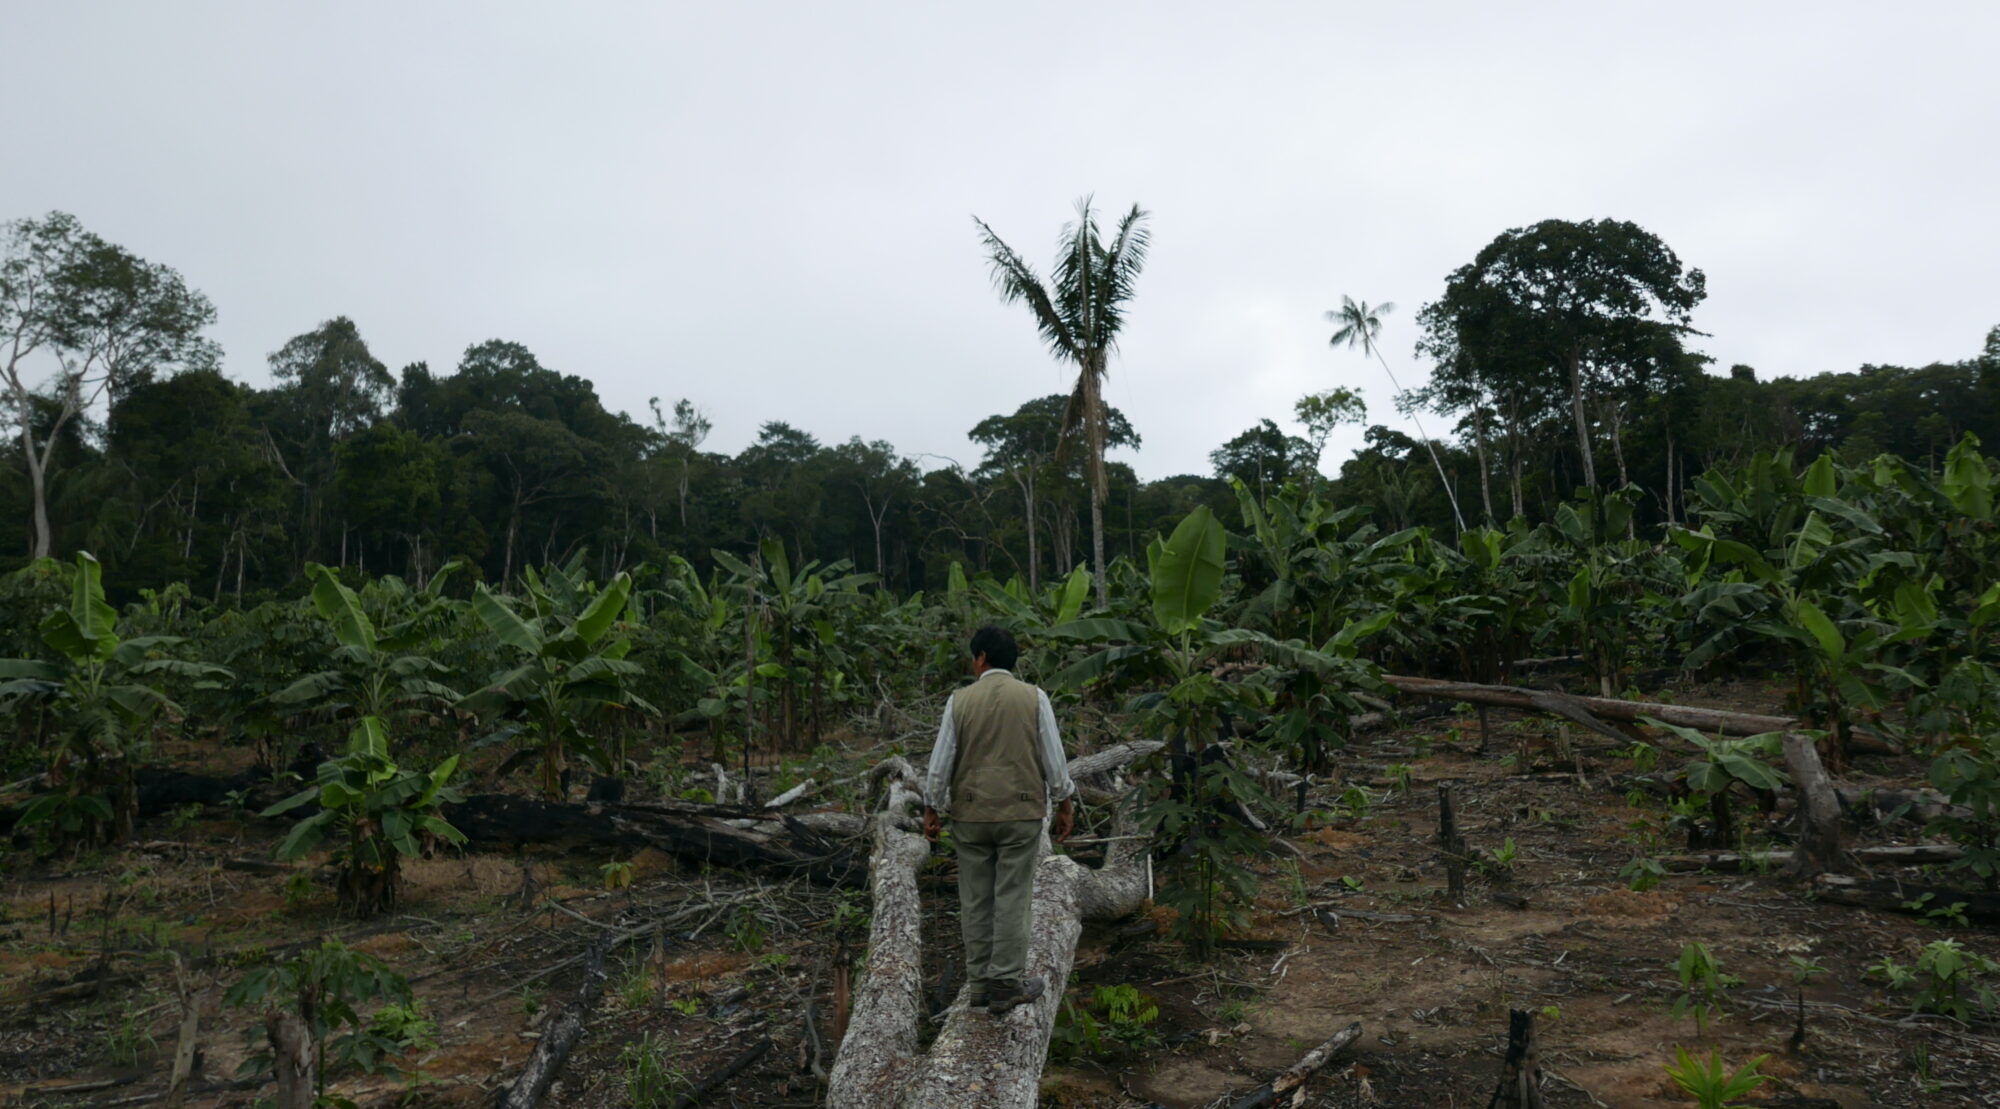 <p>Demetrio Pacheco walks through his forestry concession in Madre de Dios, Peru, where his son was murdered after facing nearly a decade of threats. The Escazú Agreement could increase protection for environmental defenders in Peru, but the country’s government is yet to ratify it (Image: Jack Lo)</p>